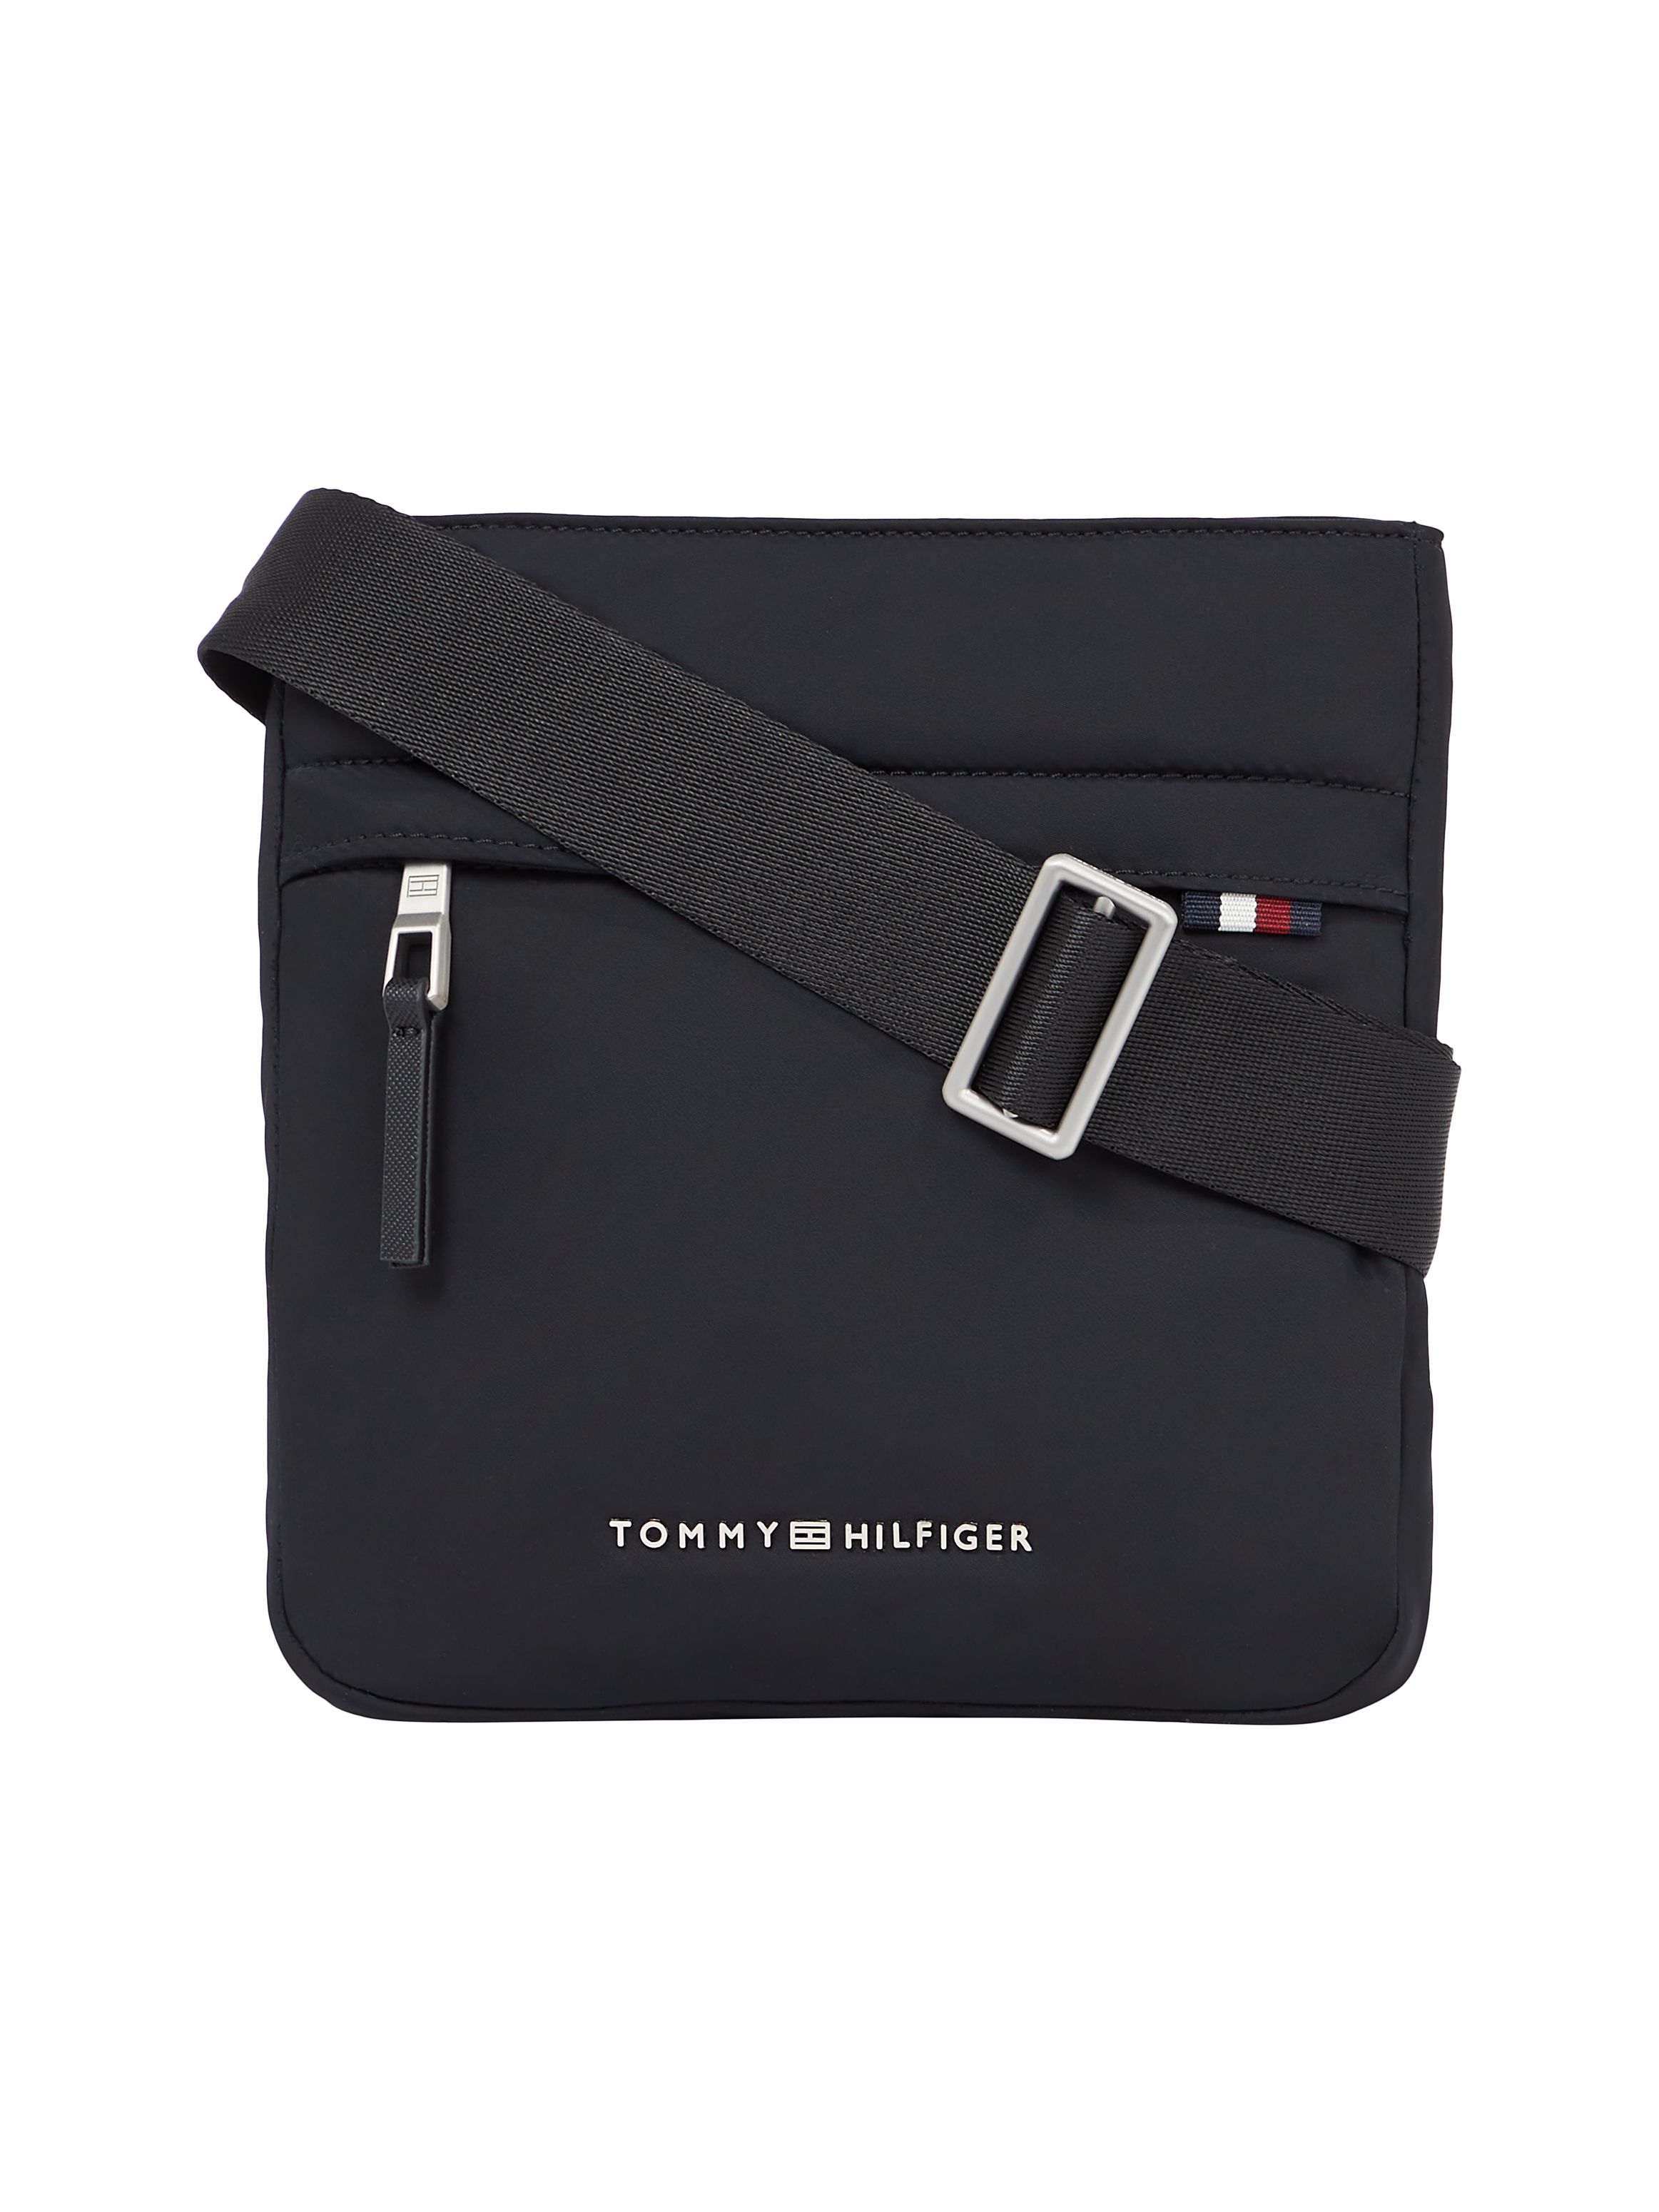 Tommy Hilfiger Signature Small Crossover Bag